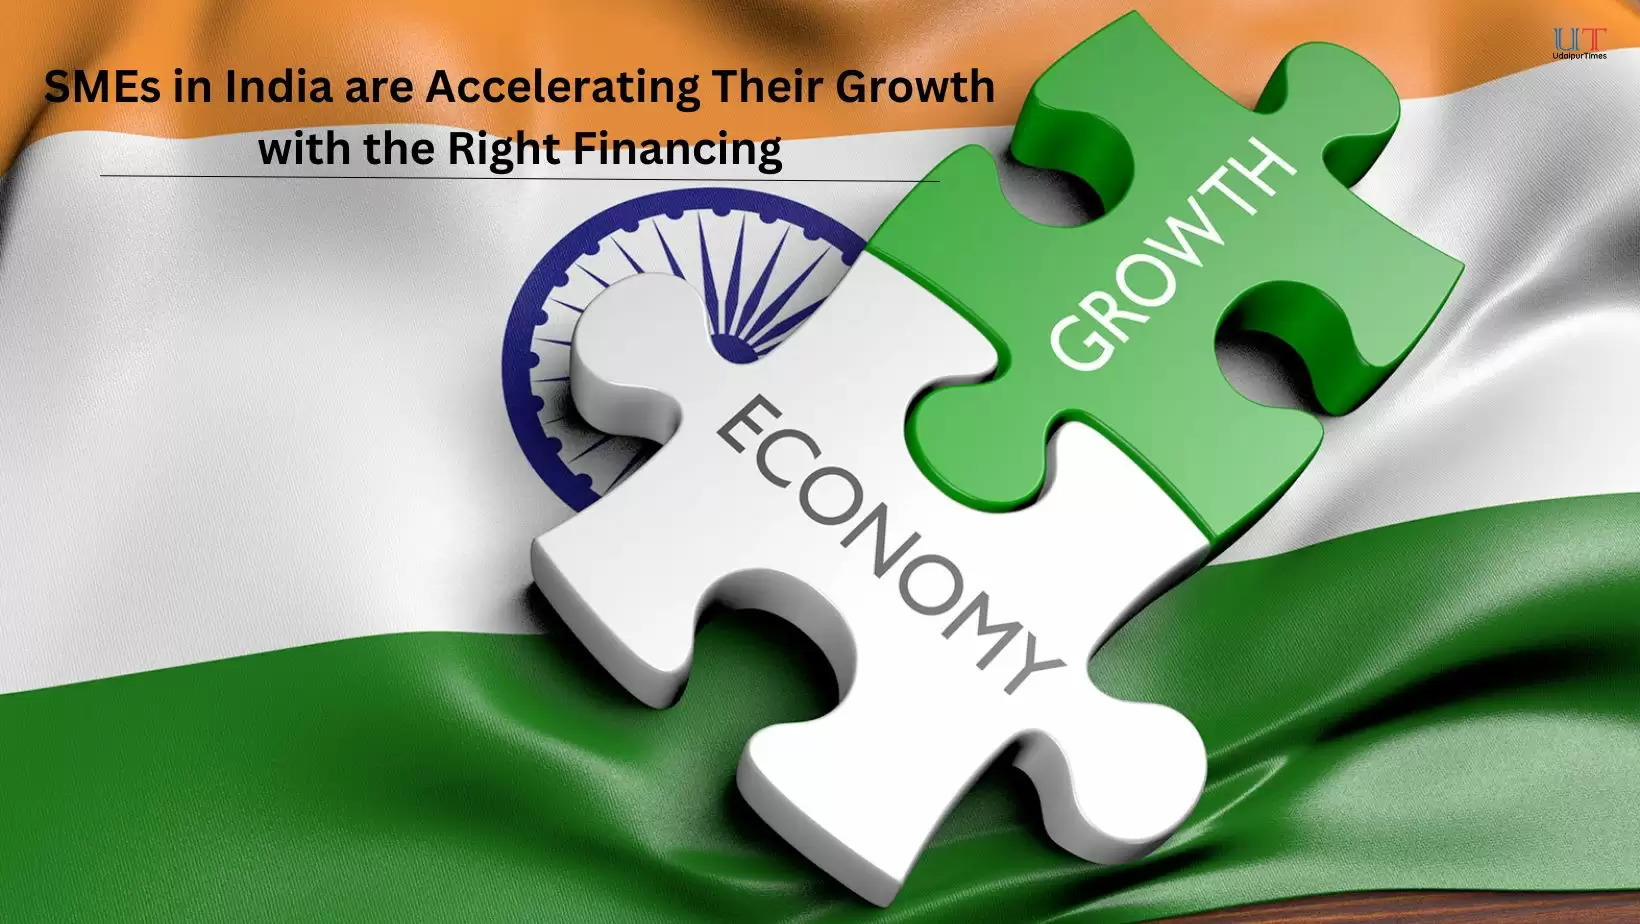 SMEs in India are Accelerating Their Growth with the Right Financing